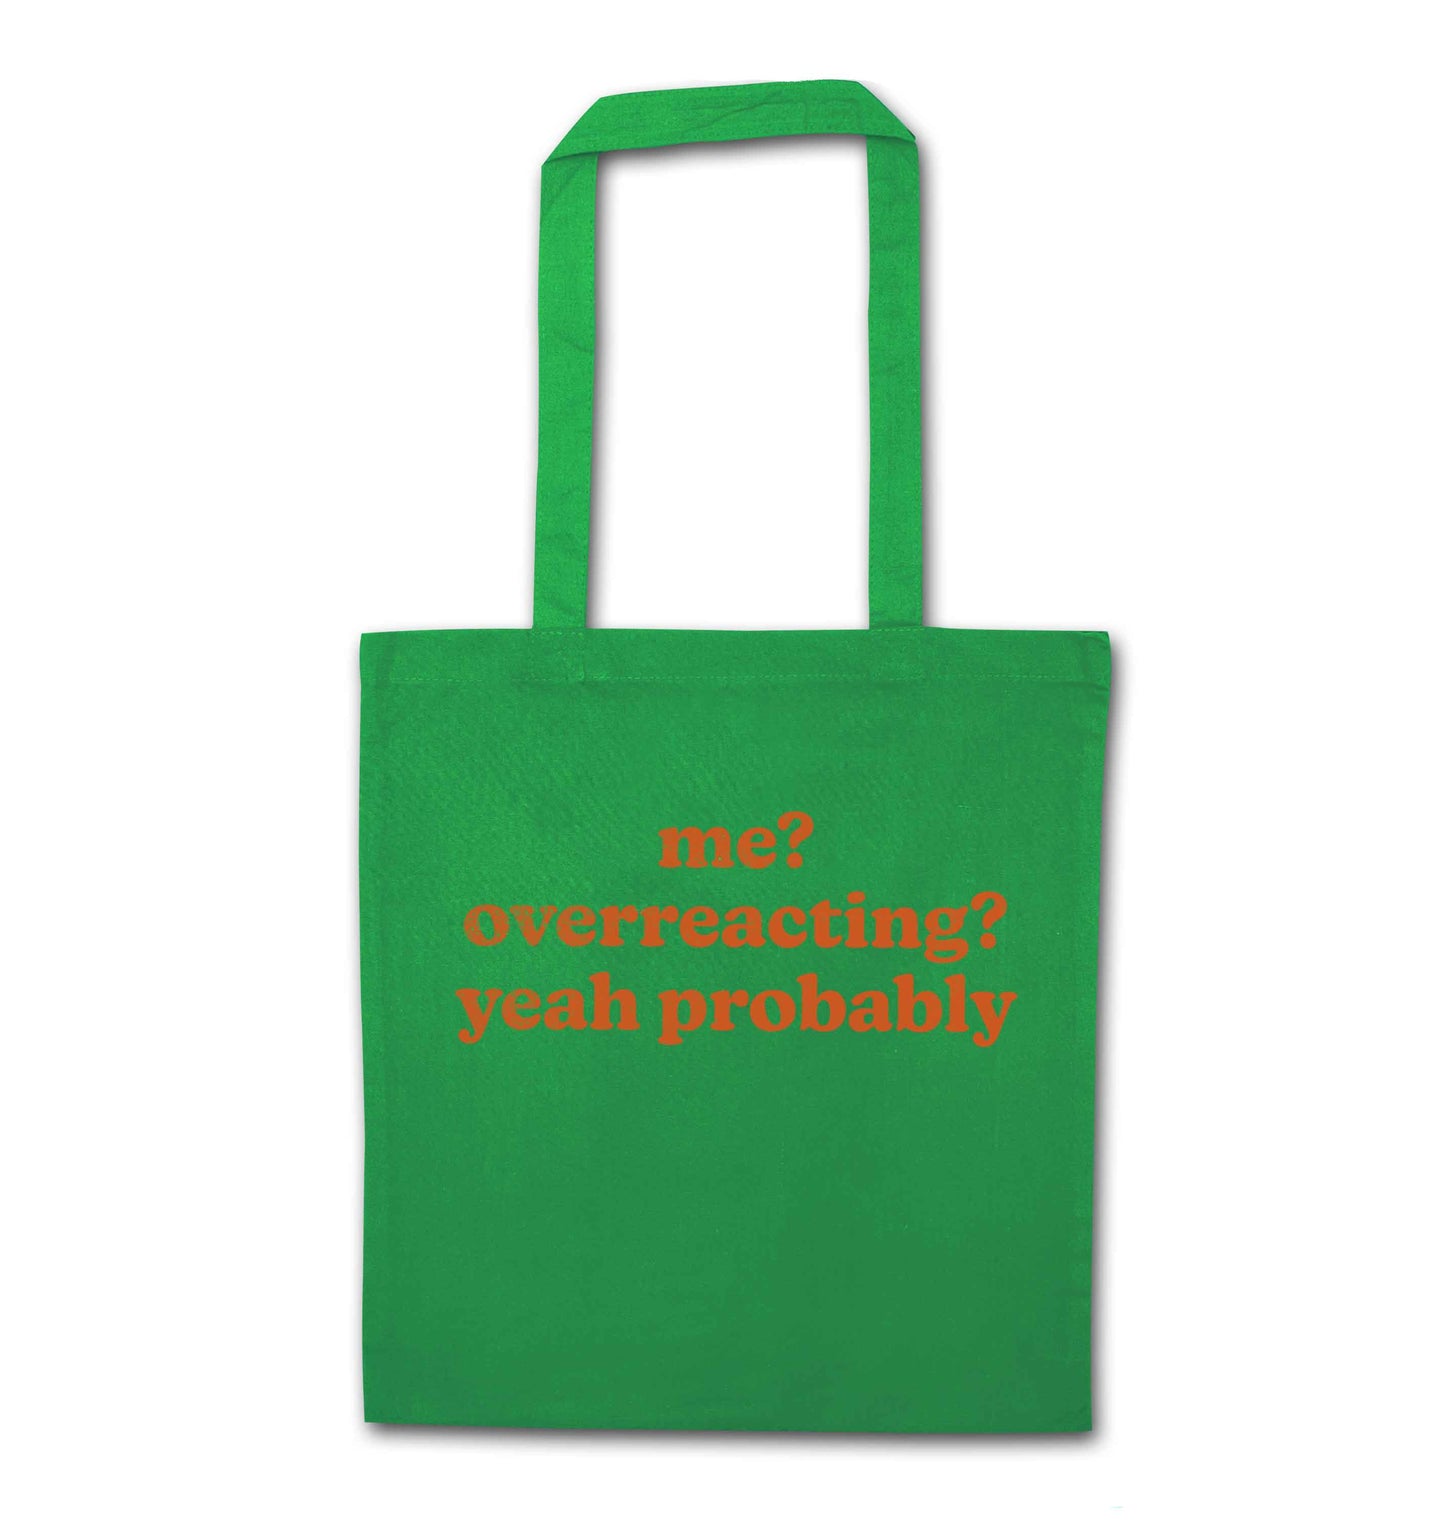 Me? Overreacting? Yeah probably green tote bag